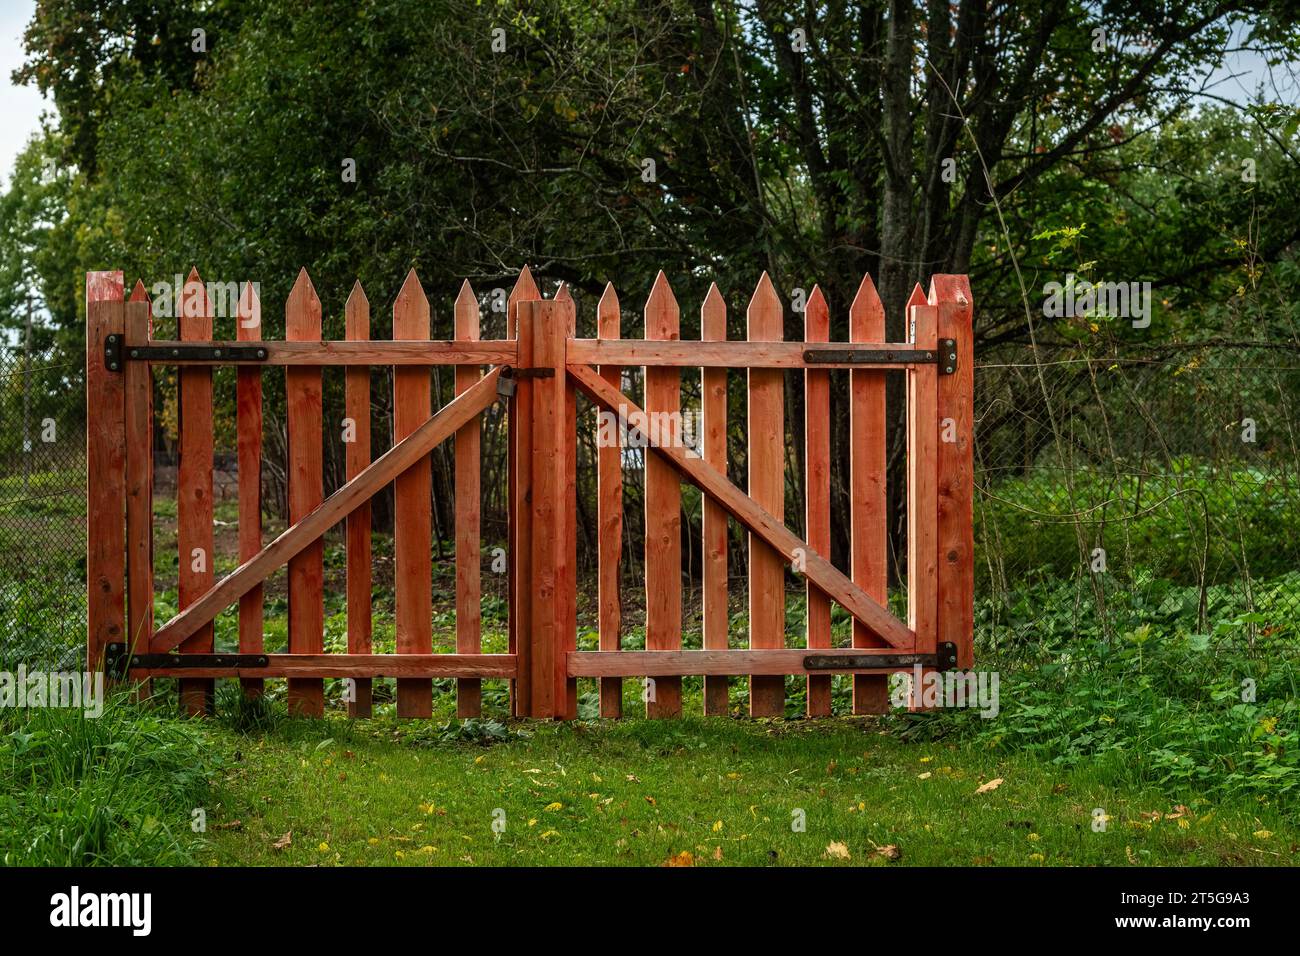 Closed gates made of wooden picket fence, painted red, against a background of green trees. Stock Photo